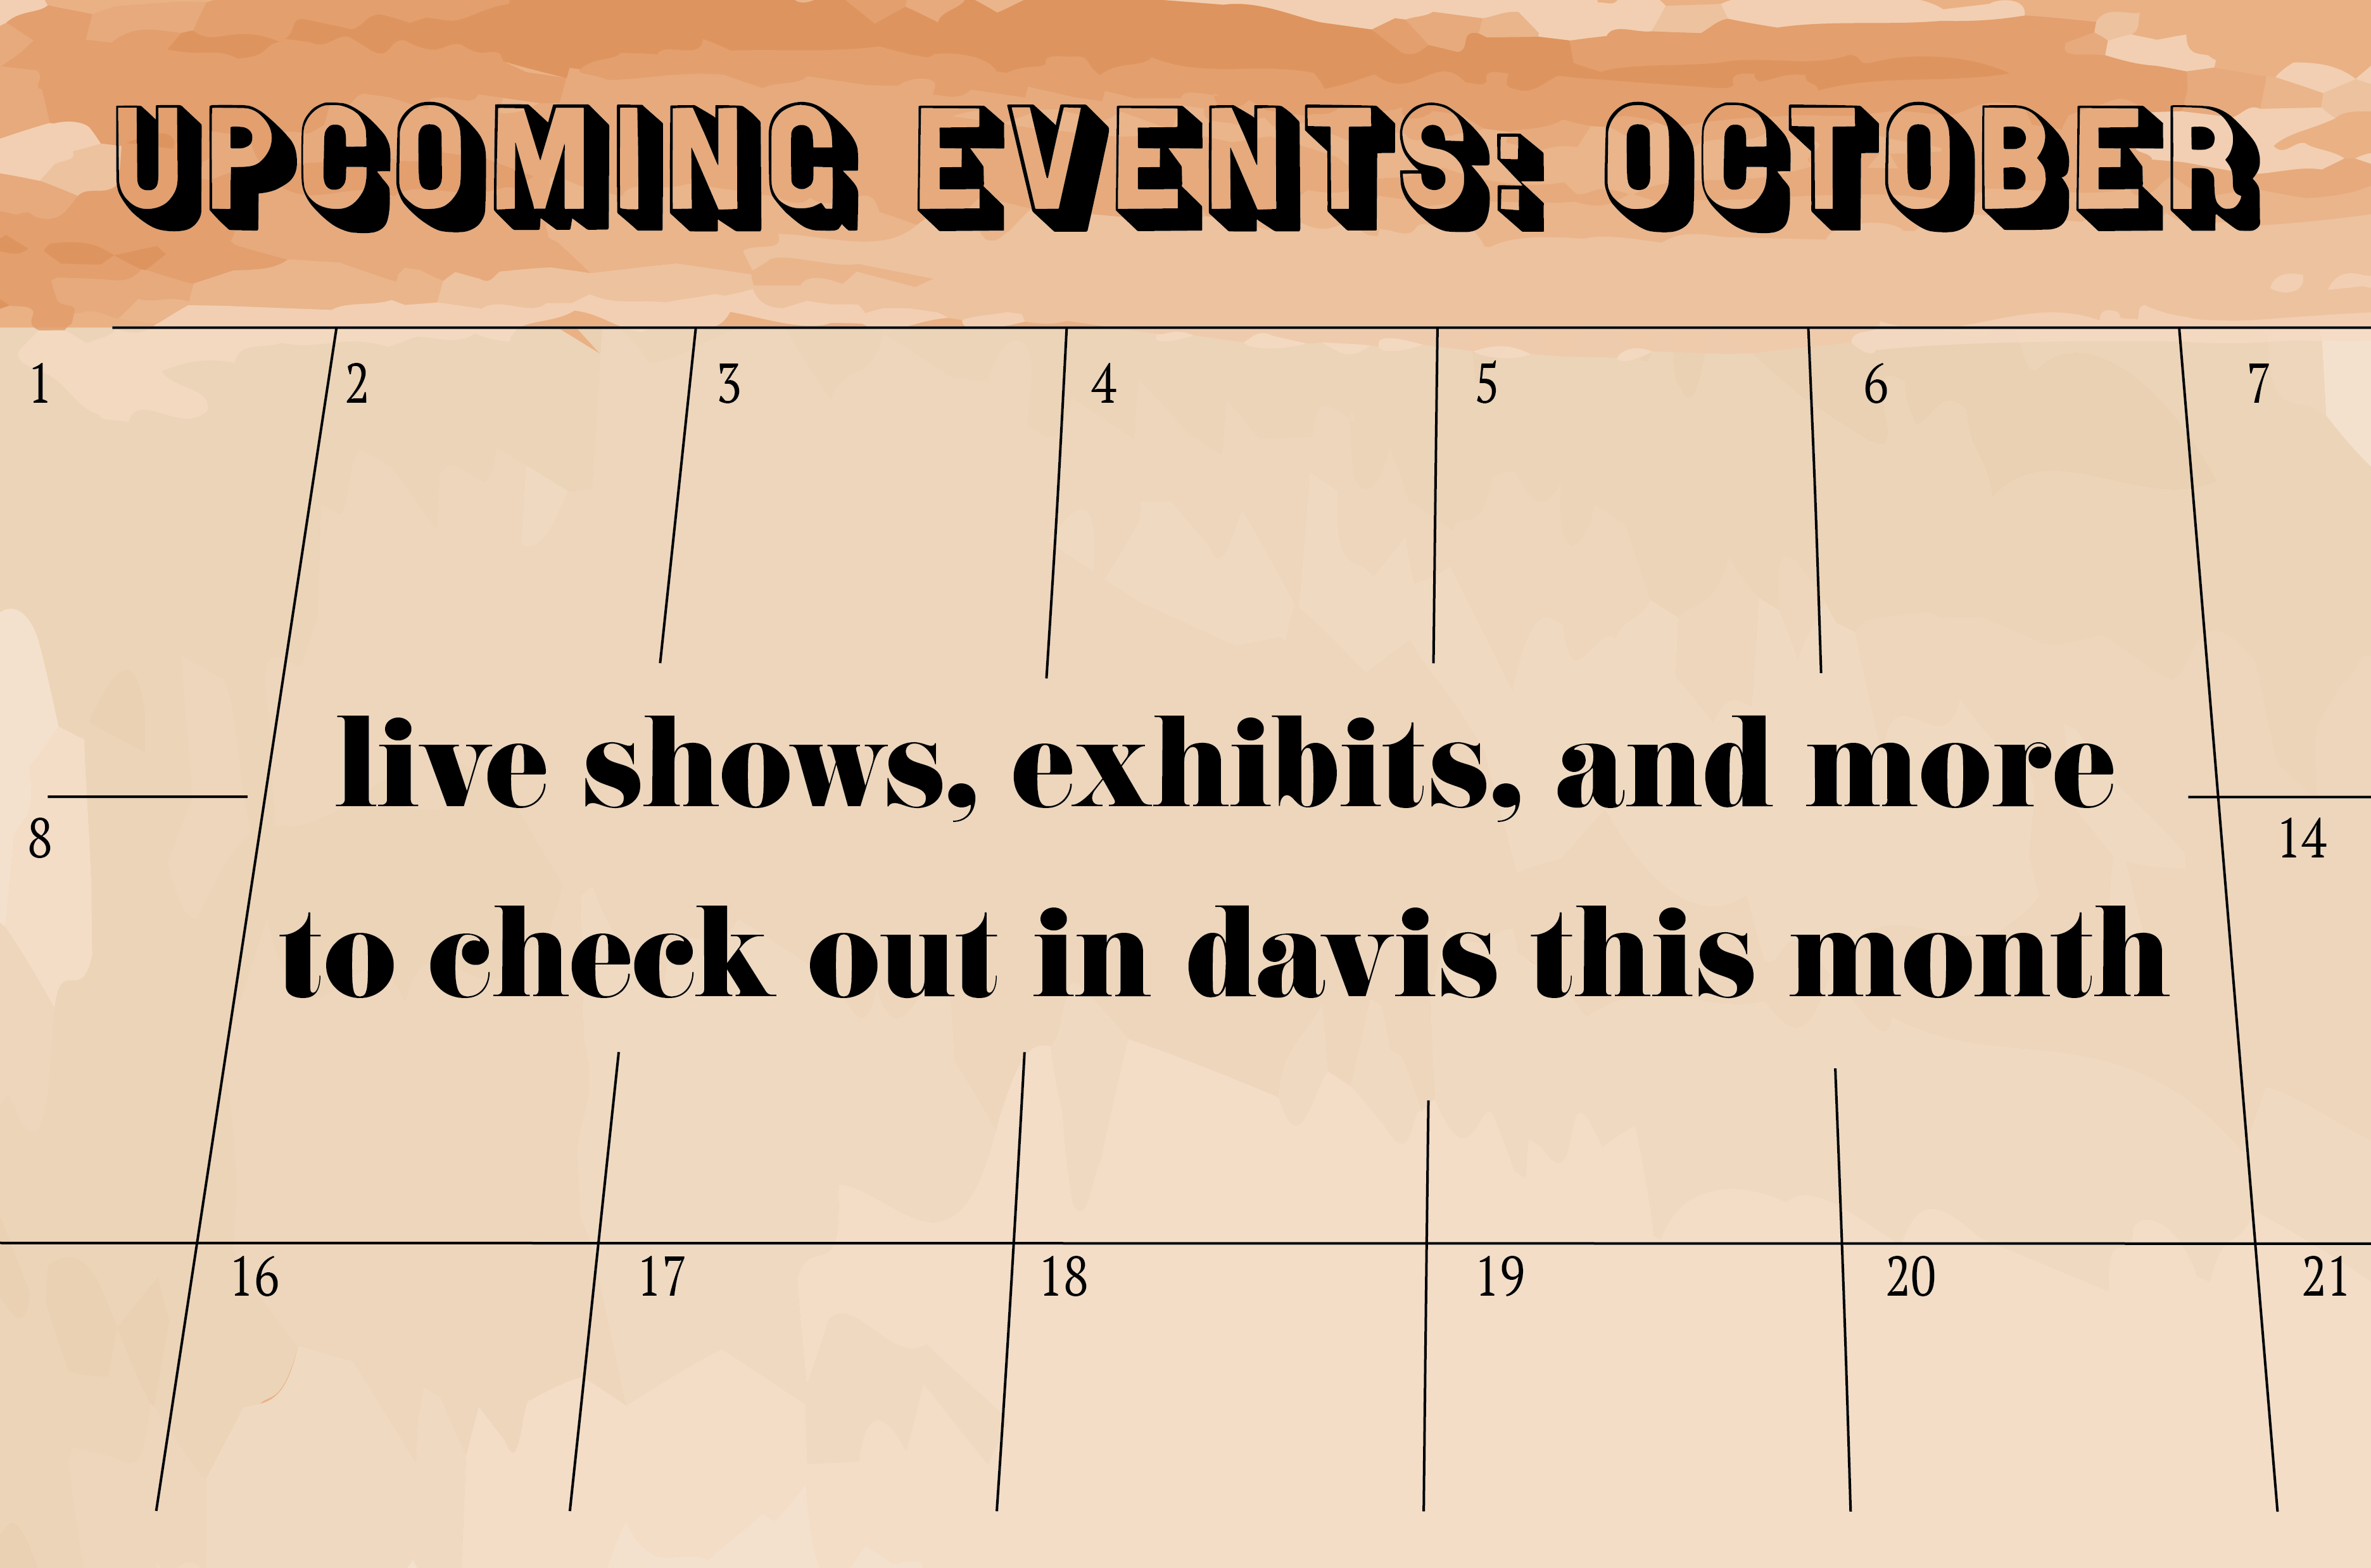 Calendar with "Live shows, exhibits and more to check out this month" written on it